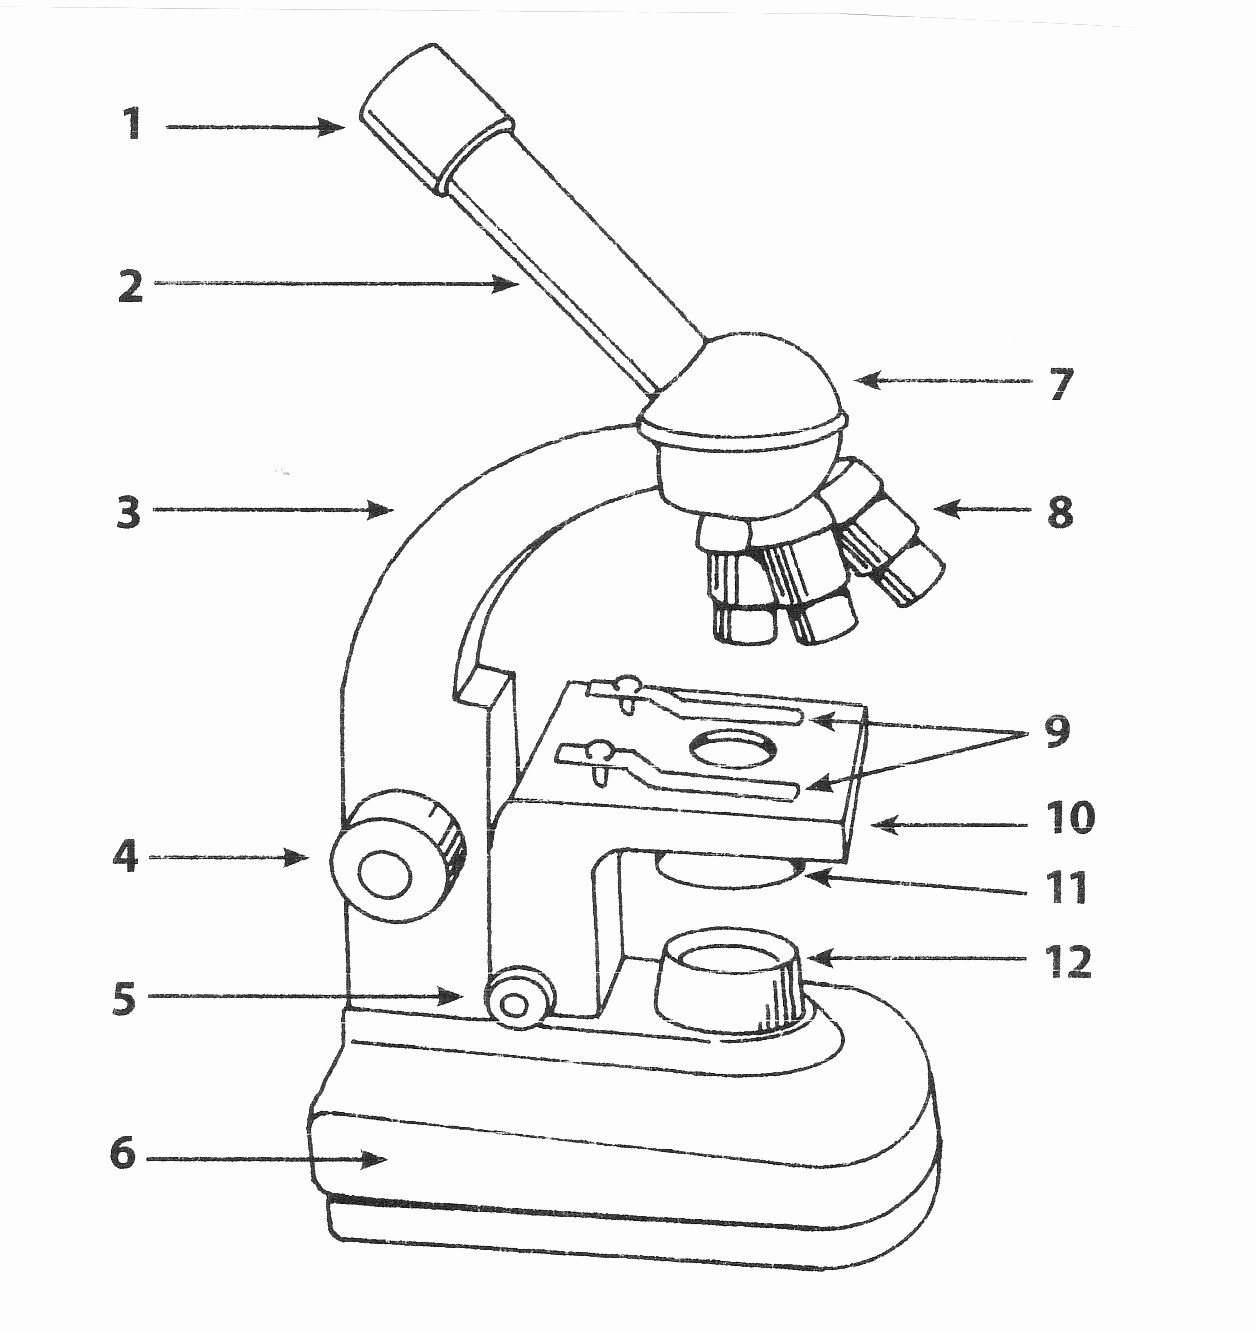 Parts Of A Microscope Worksheet Luxury Pin On Science School Stuff